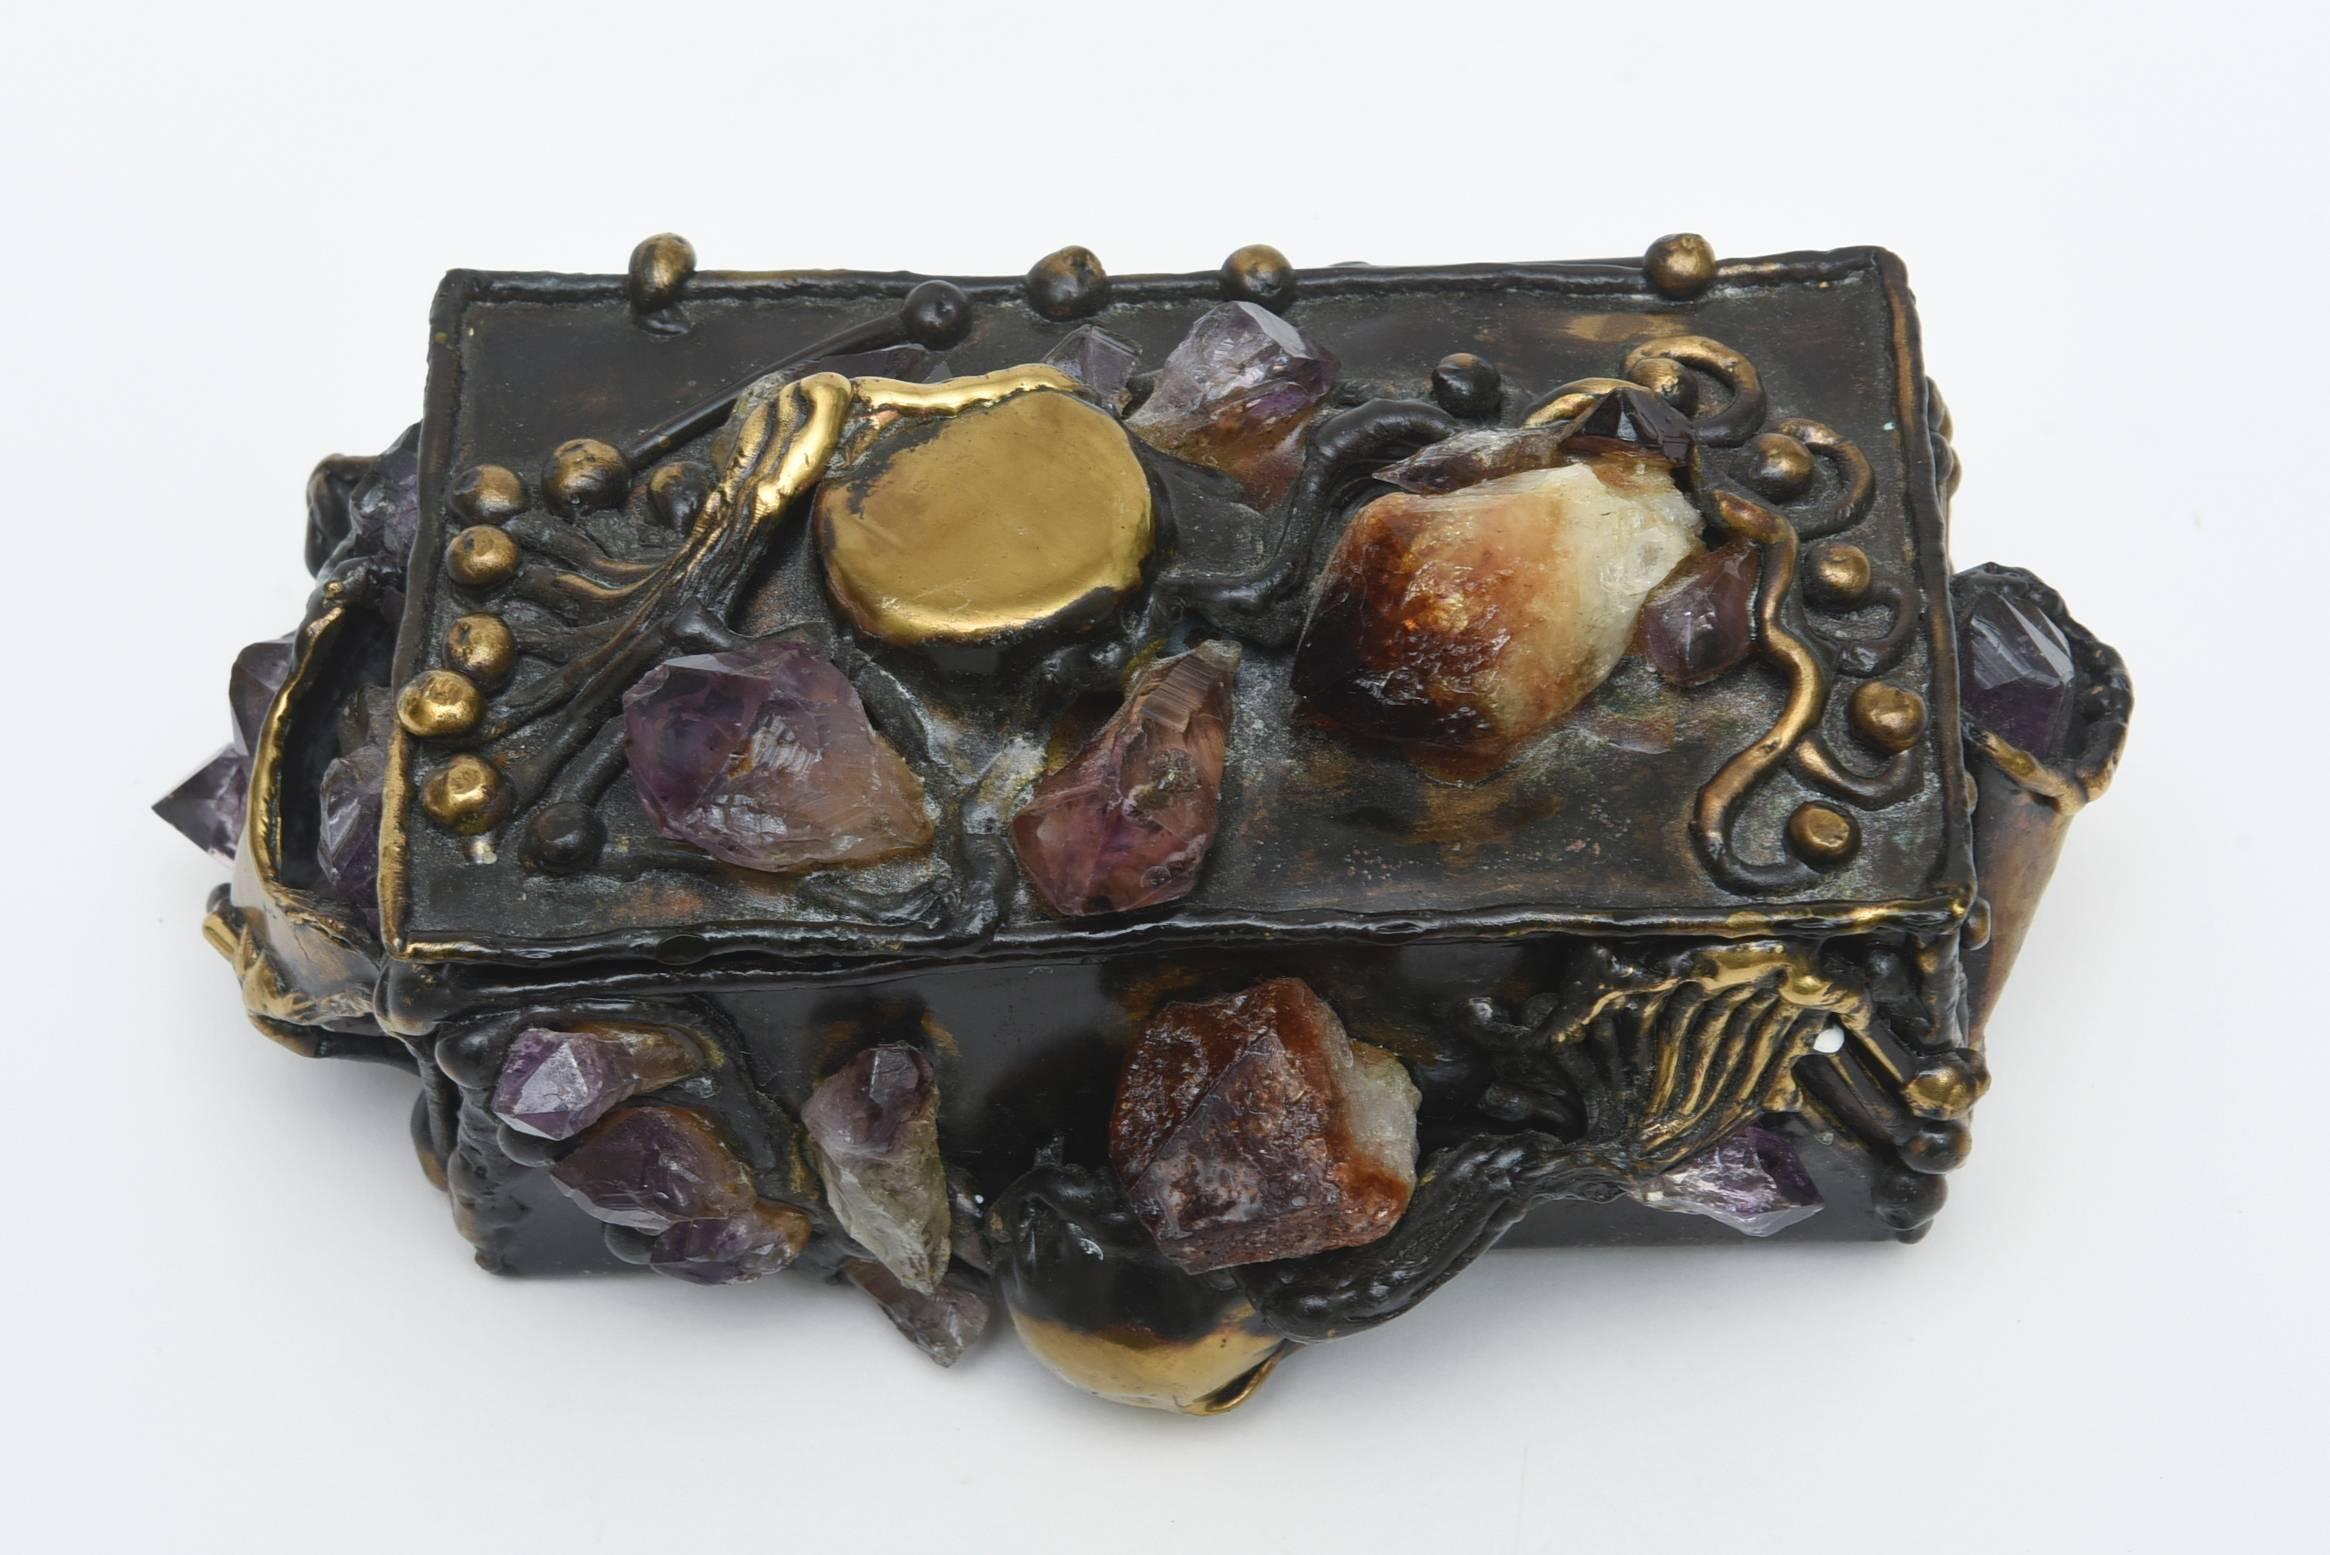 This is art, sculpture and a jewel.... all in one small box.
It is Brutalist in form, beautiful in stones of amethyst and quartz and mixed metals of copper and brass.There are jettings of stones and brass implements protruding... in sculptural form.